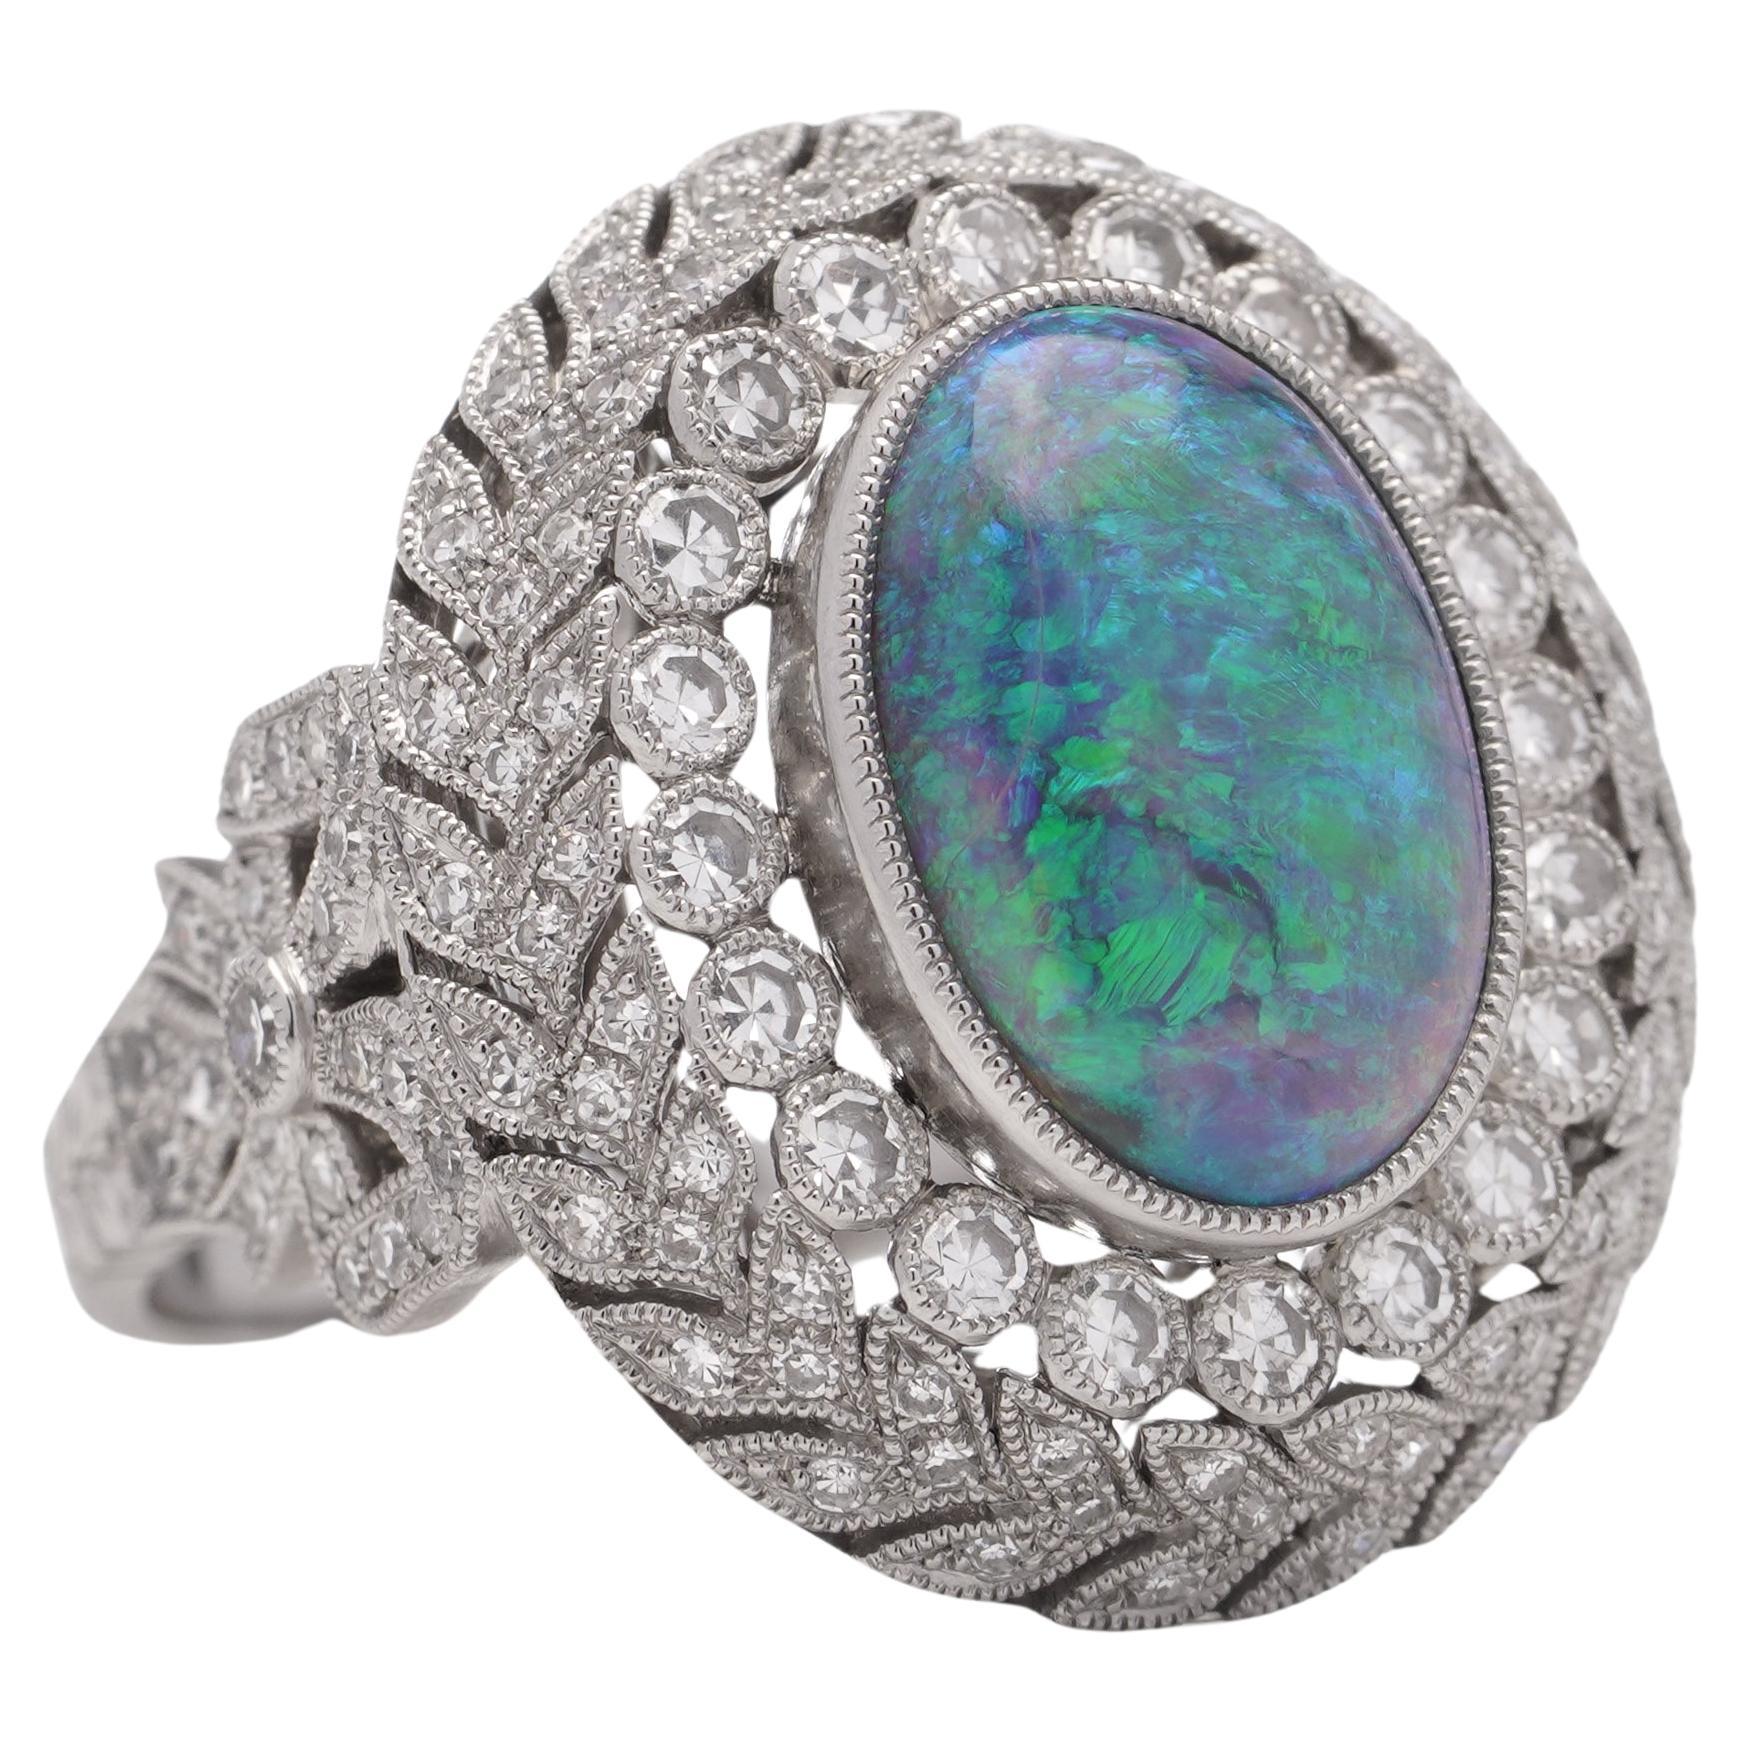 JoAq 850 Platinum 3.30 carats of Oval Opal cluster ring  For Sale